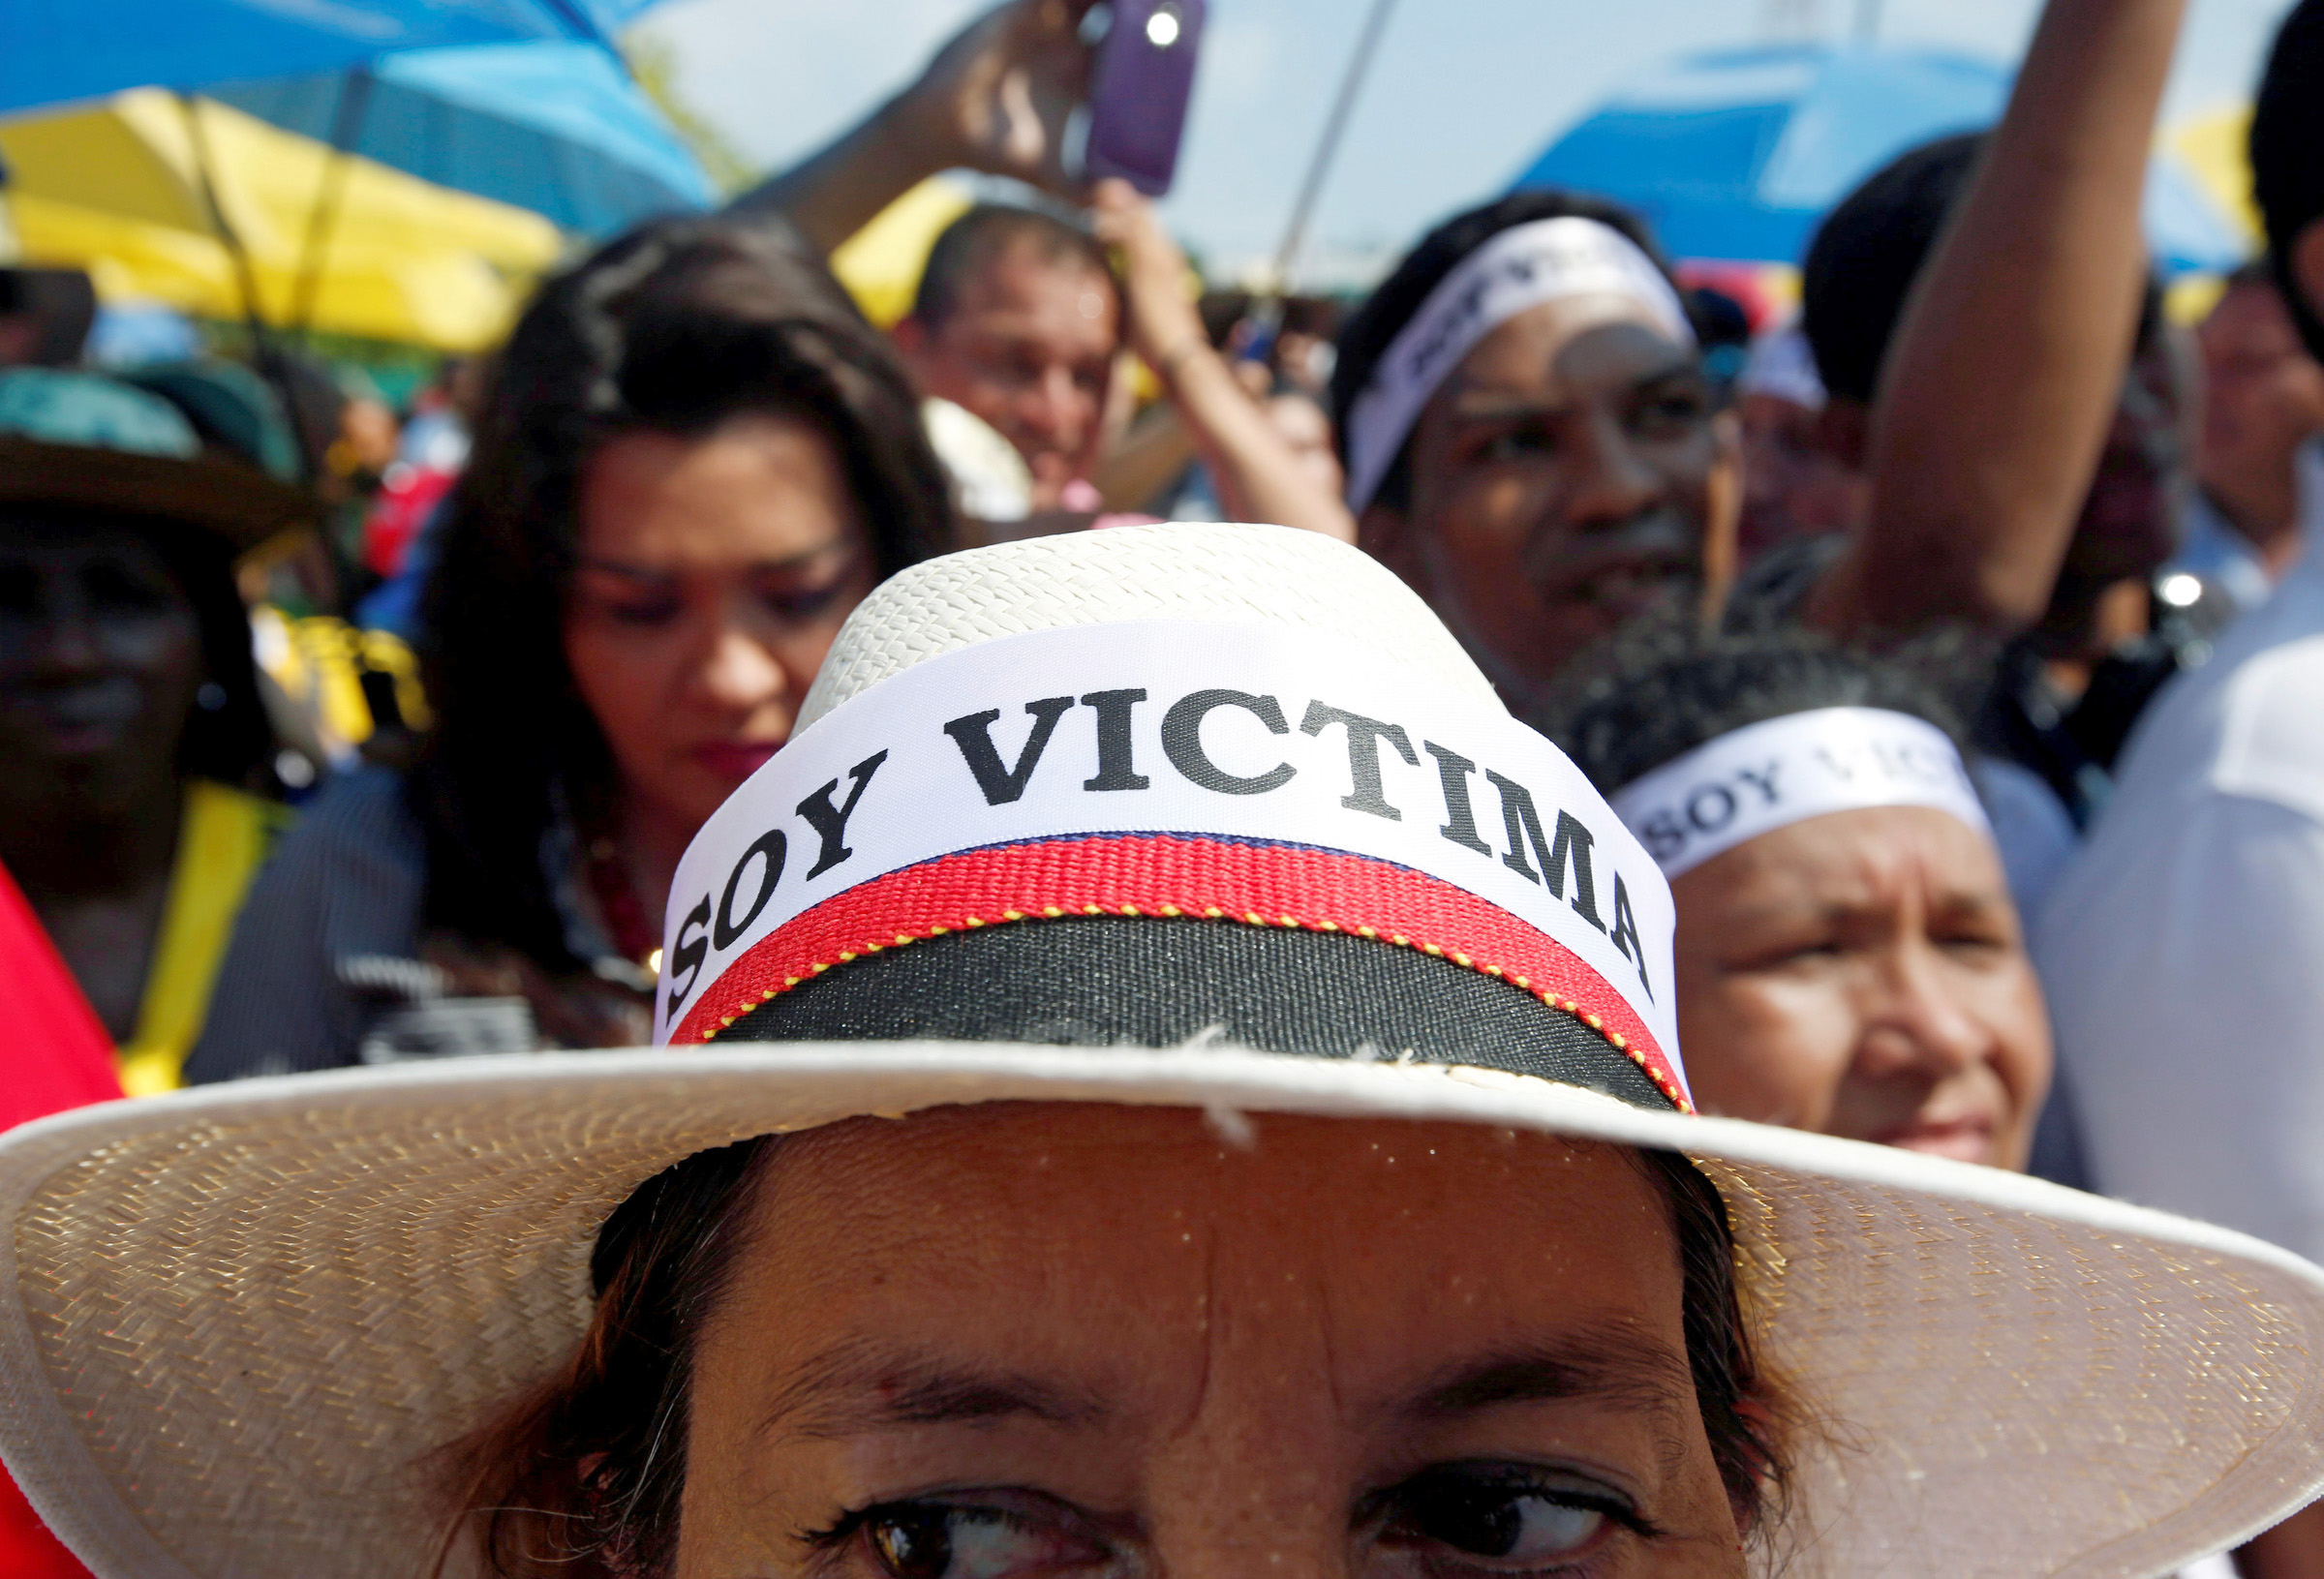 A demonstrator with an "I am a victim" hat protests the government's peace accord with the Revolutionary Armed Forces of Colombia in Cartagena, Colombia, Sept. 26. The peace accord would allow rebels to enter parliament without serving any jail time. (CNS photo/John Vizcaino, Reuters)